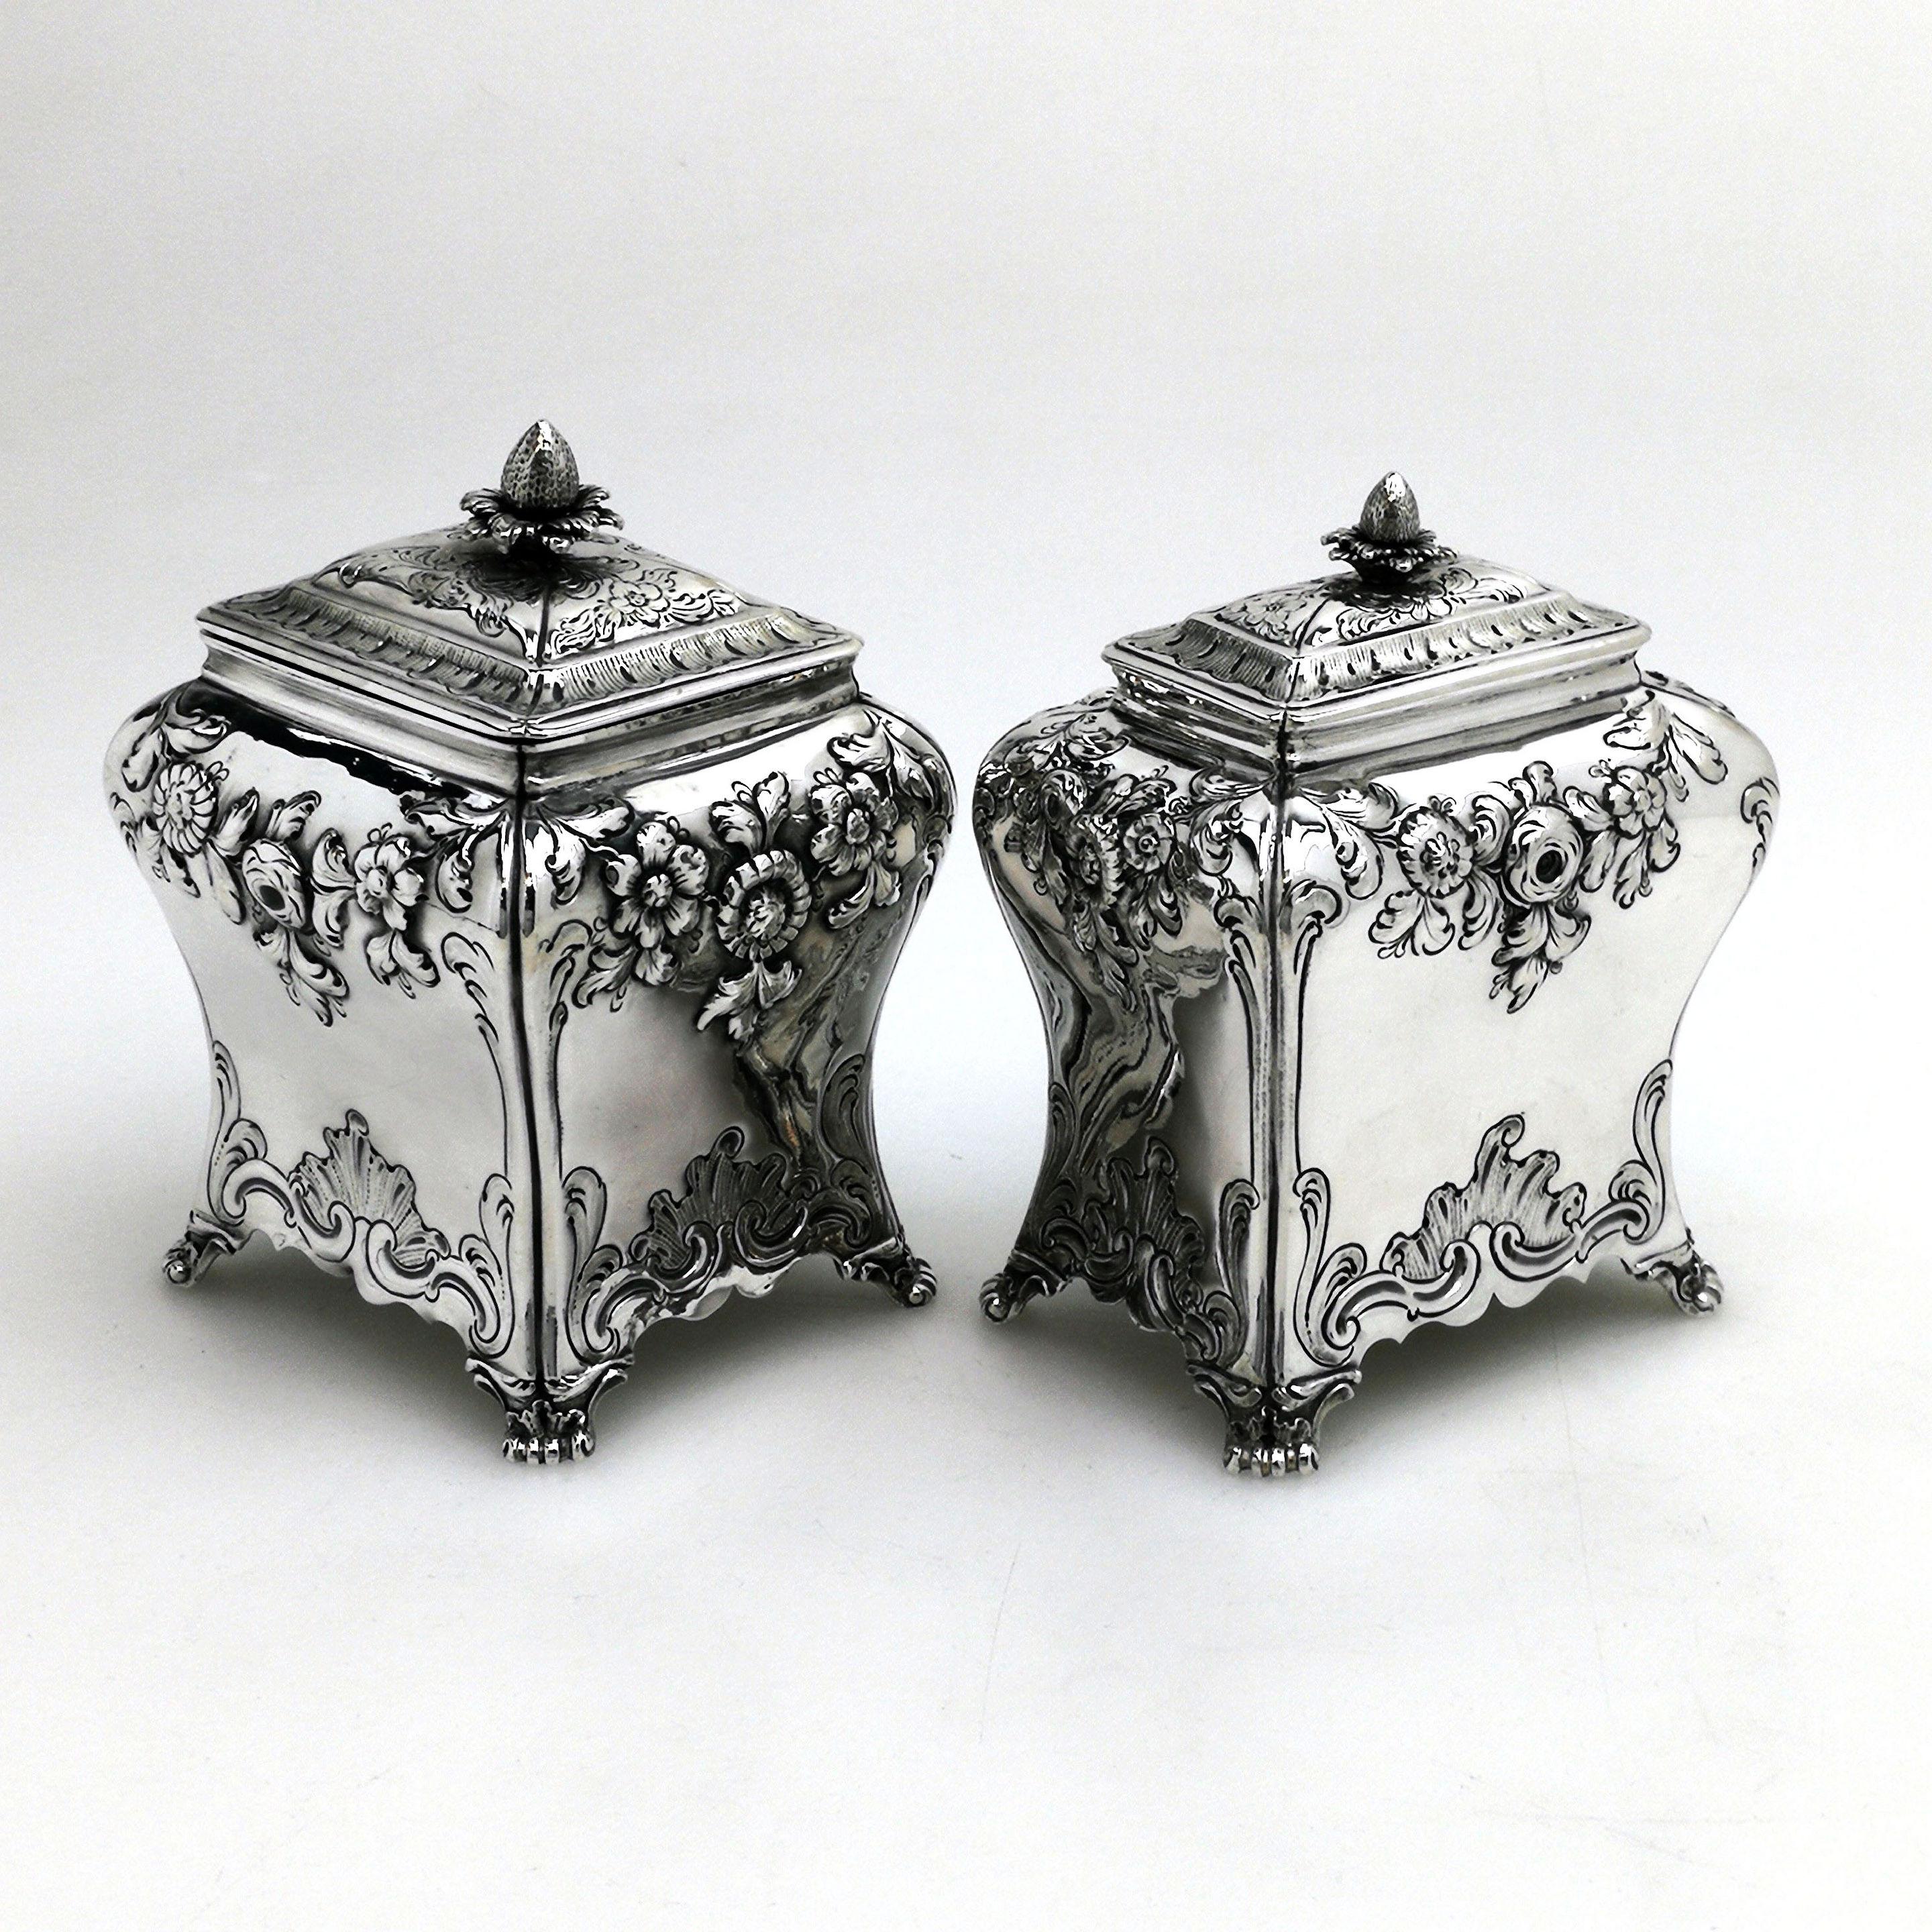 A Pair of lovely sntique Georgian solid silver graduated Tea Caddies. These rectangular Tea Caddies have beautiful chased floral swags on the upper shoulders and each stands on four feet. The Caddies are of graduates size - both the same width but